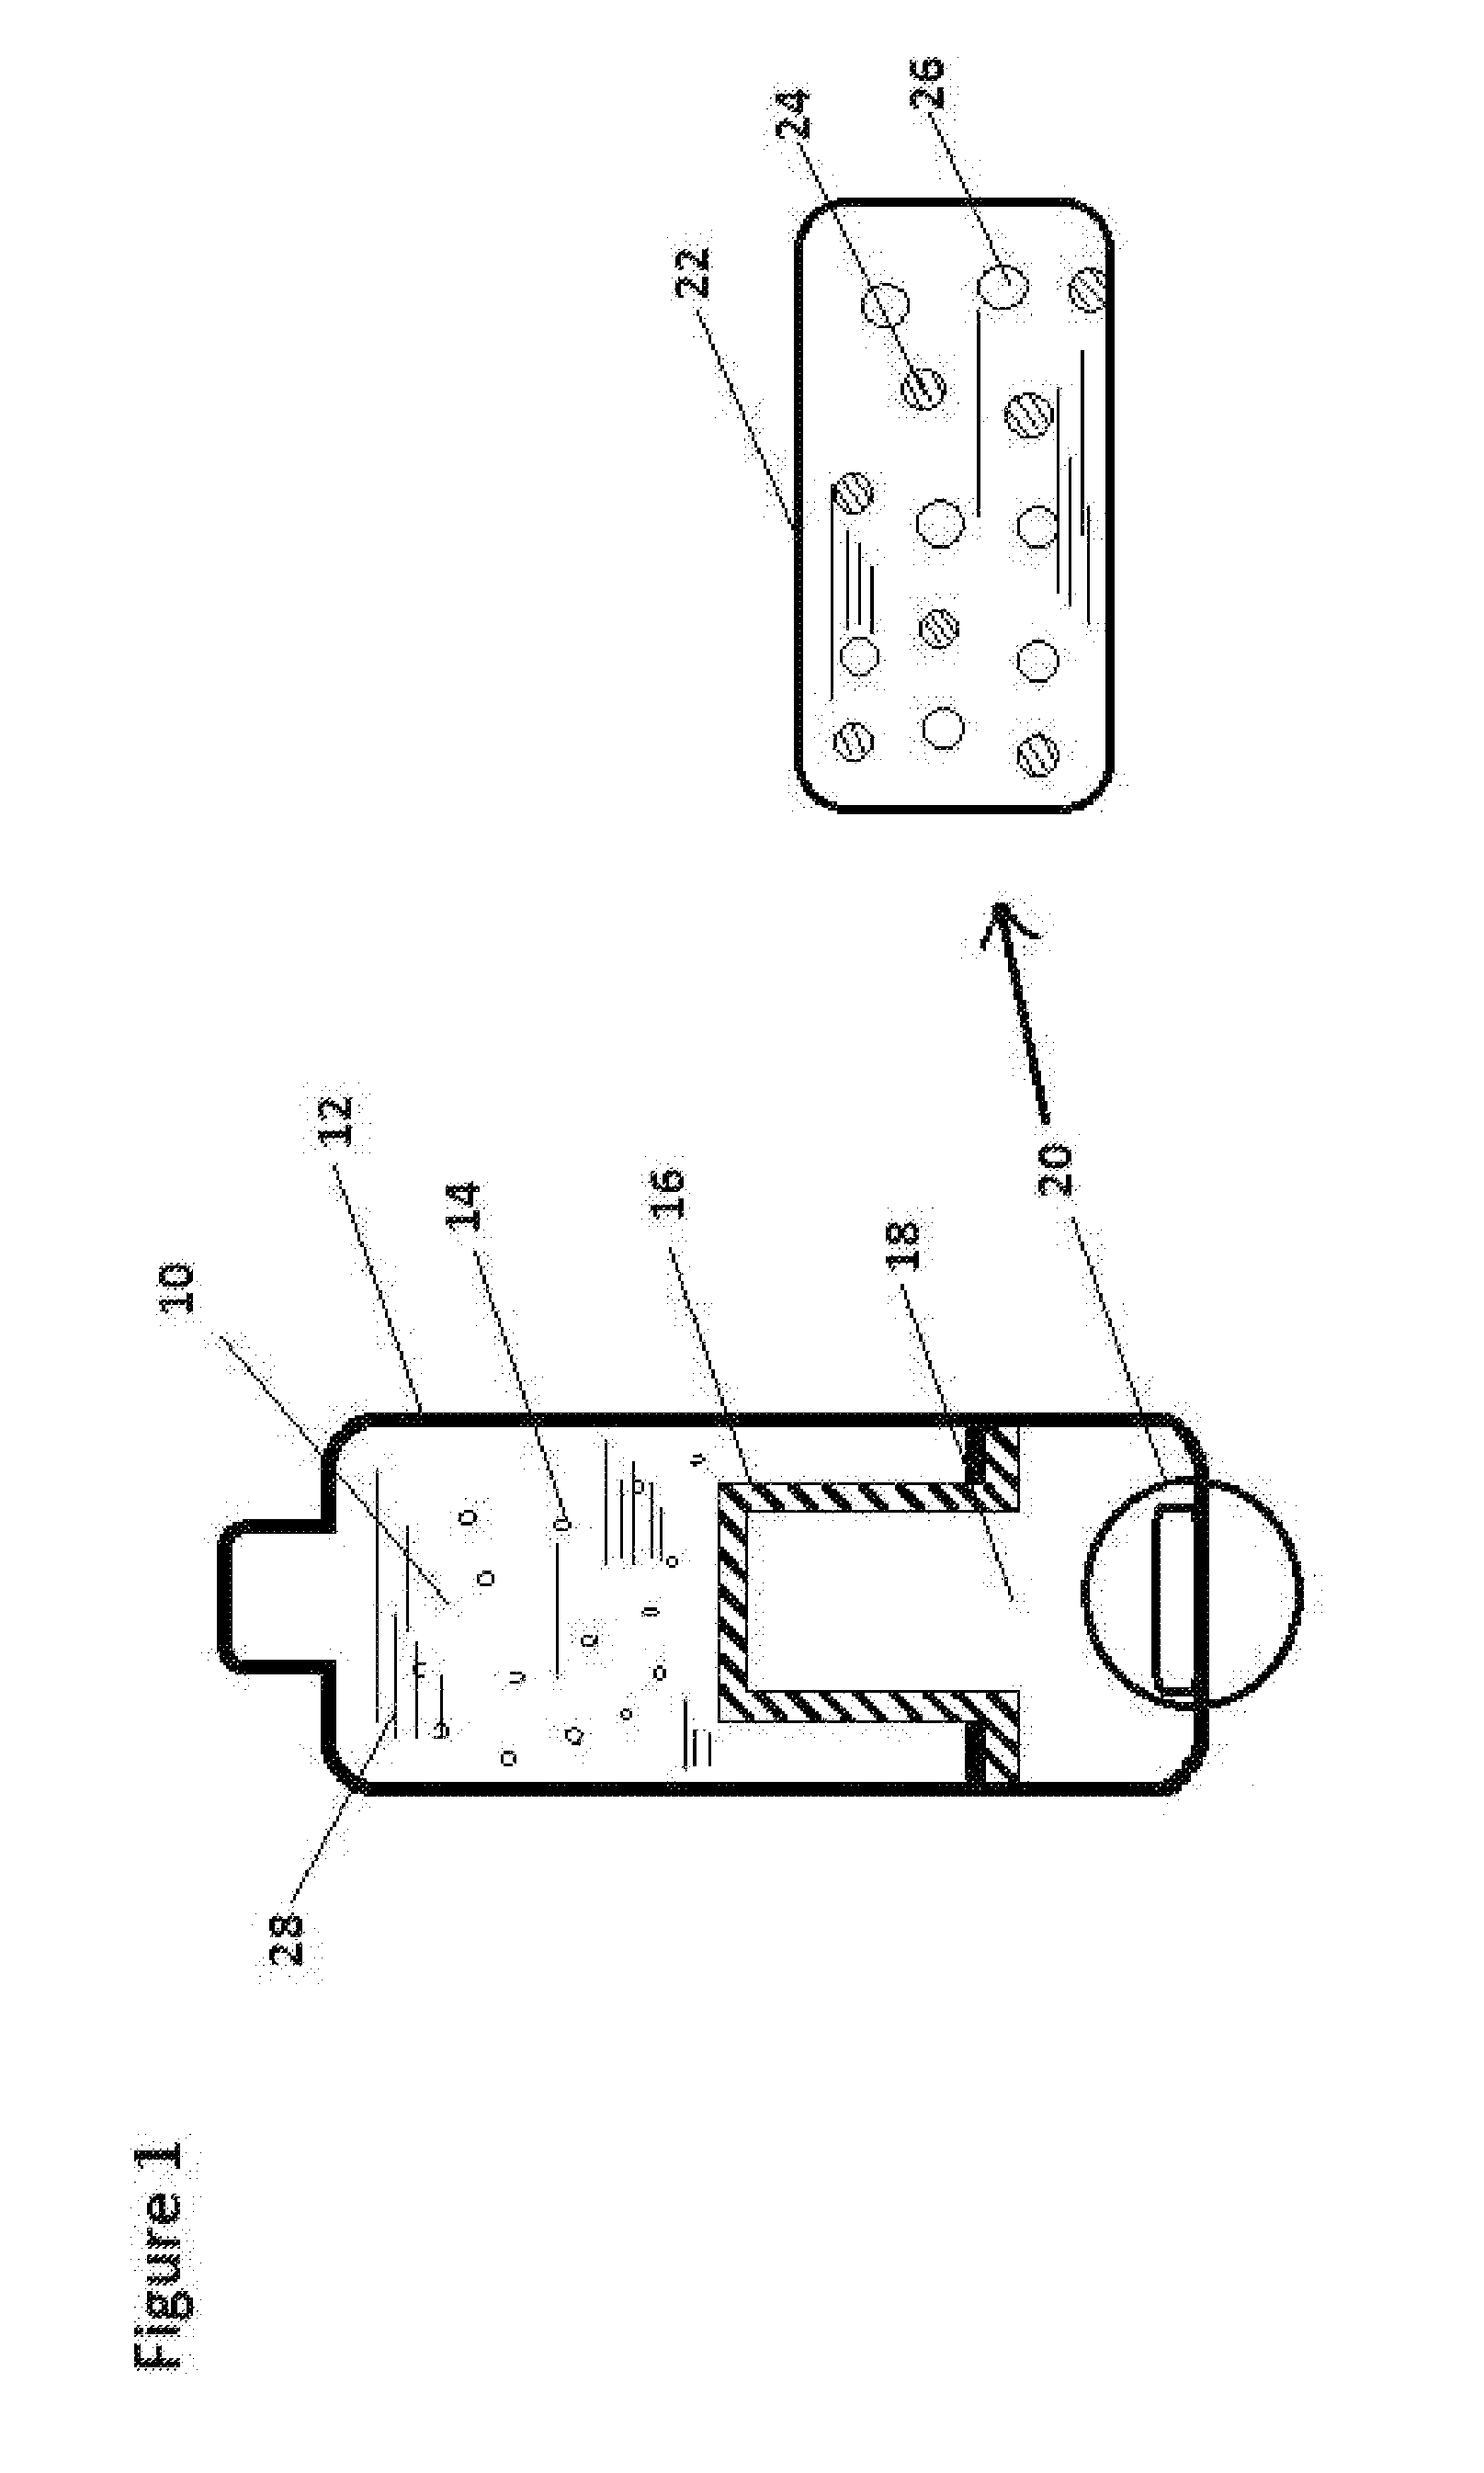 Method and Apparatus to Produce Hydrogen-Rich Materials